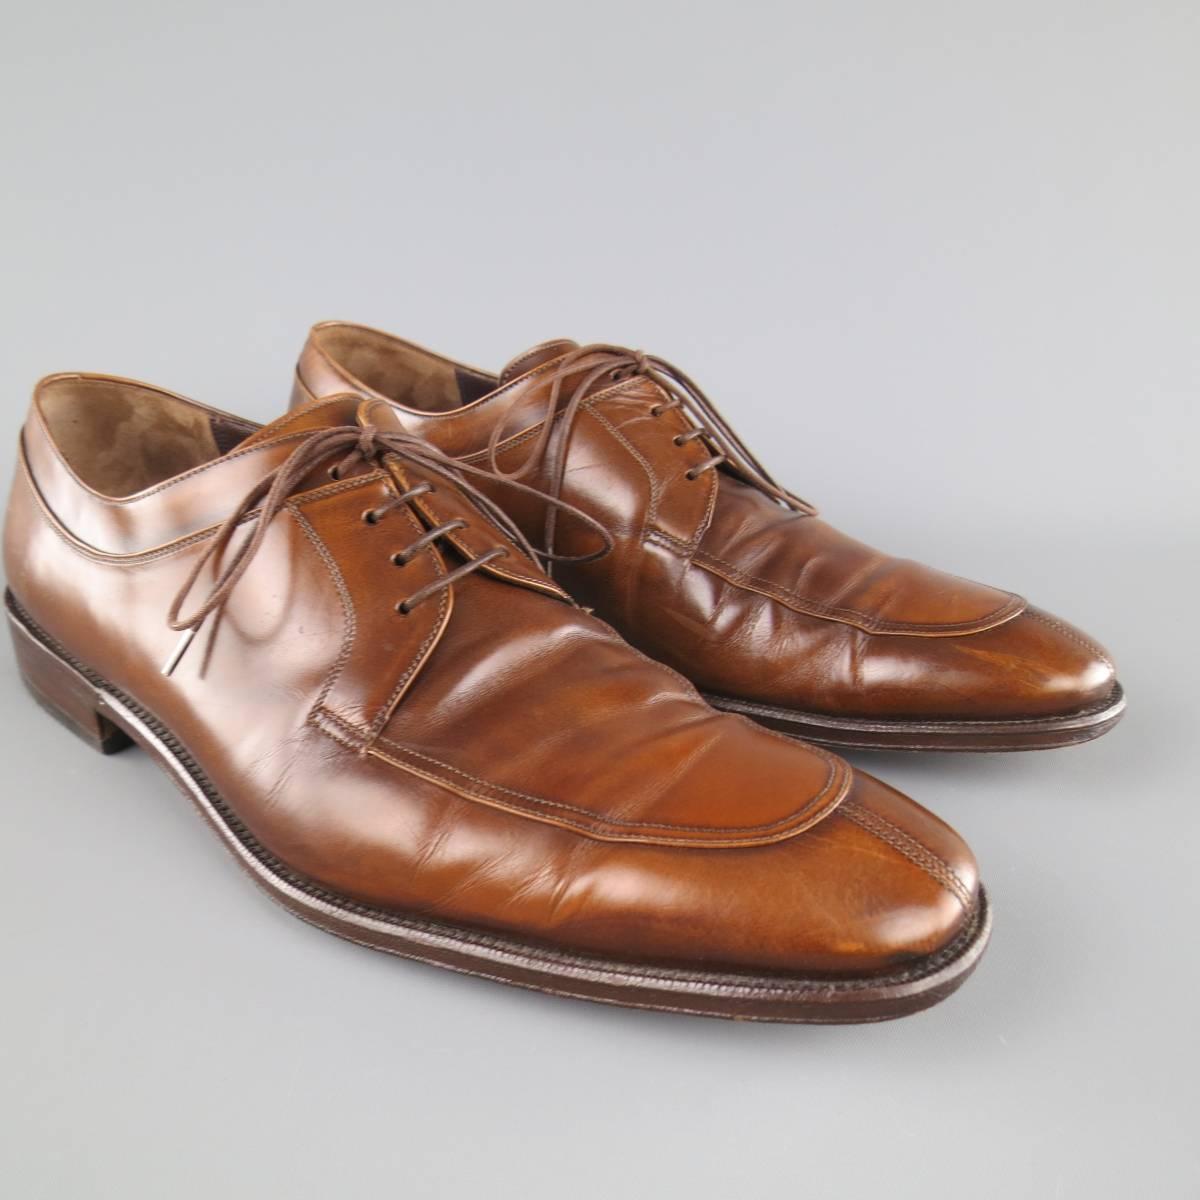 SALVATORE FERRAGAMO Lace Up Shoes consists of leather material in tan color tone. Designed in a split-toe blucher front, top tone-on-tone stitching and burnished finish. Dark brown leather sole and rubber heel. Made in Italy.
 
Fair Pre-Owned